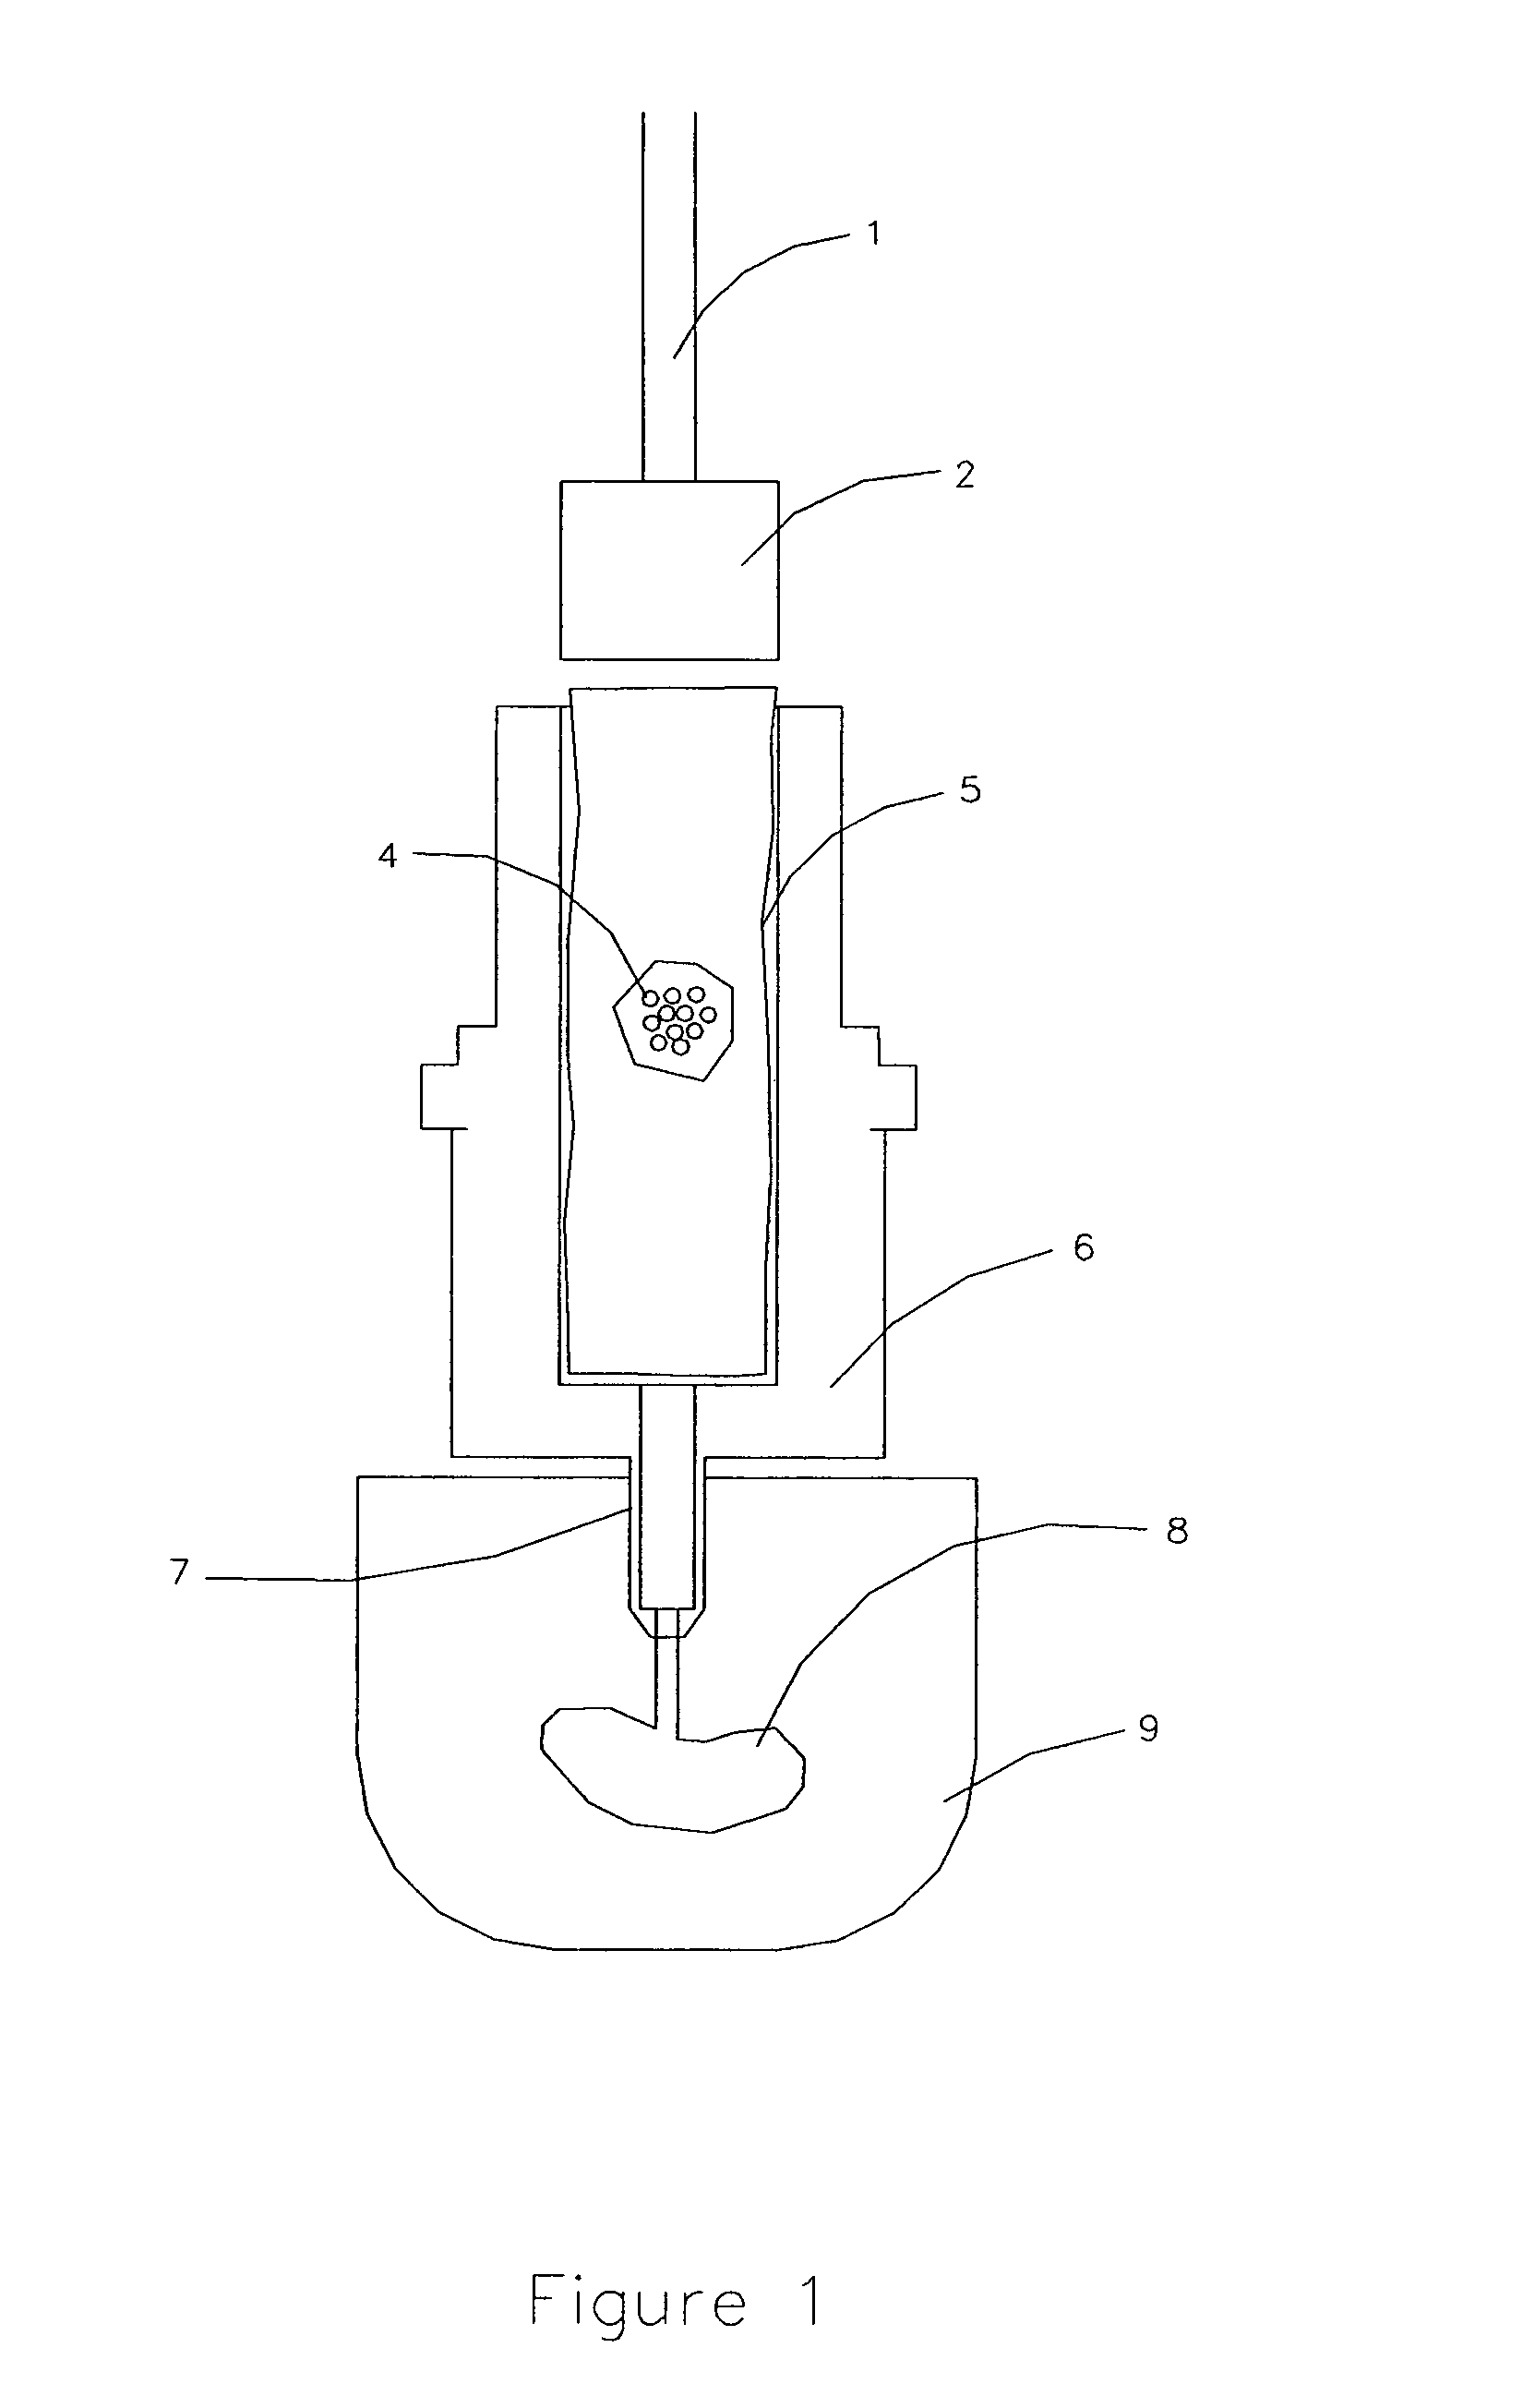 Apparatus for producing dental prostheses